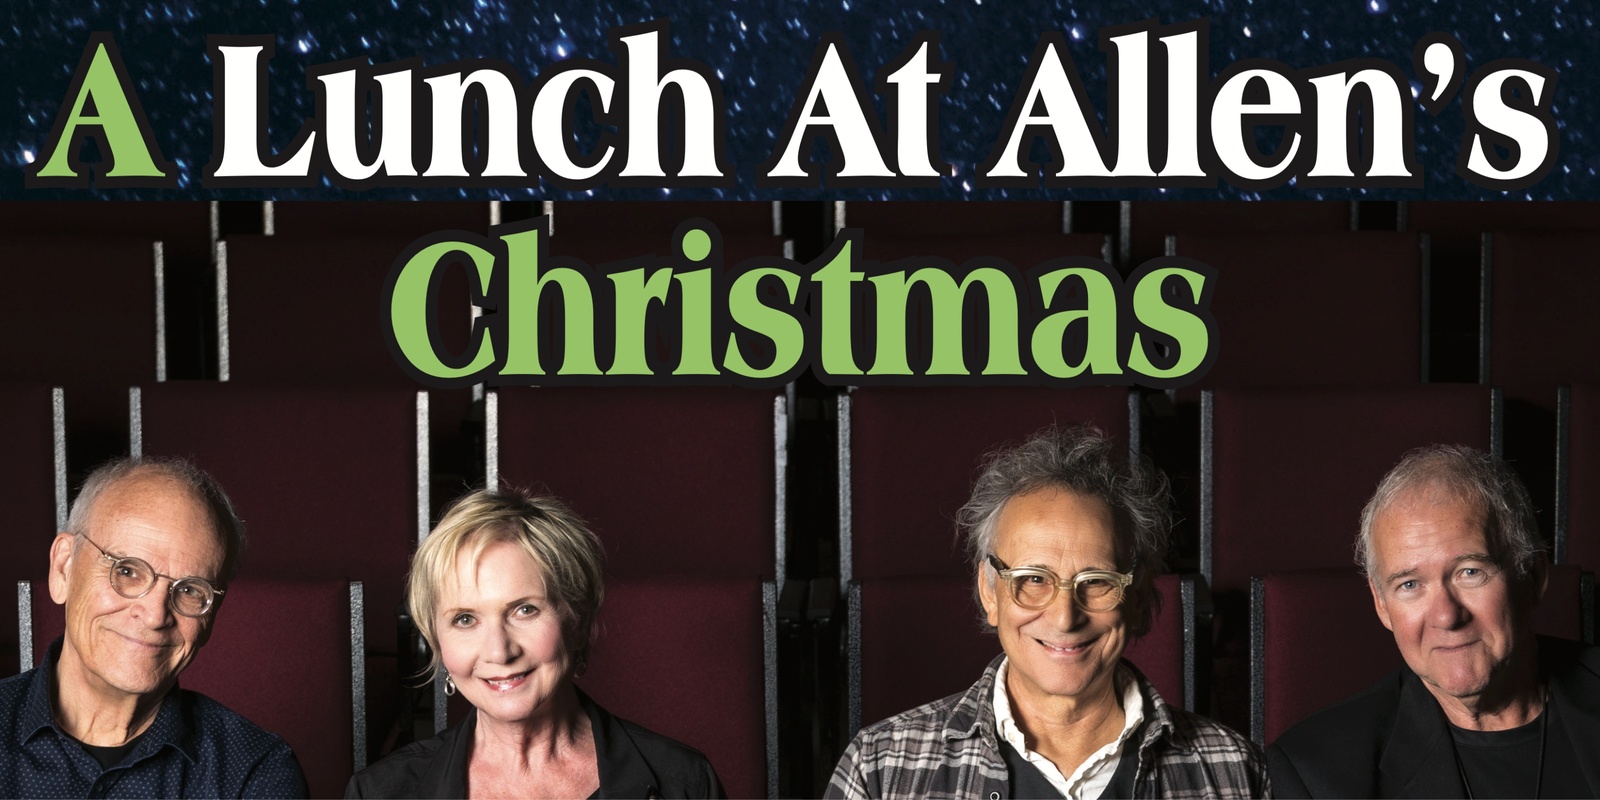 Banner image for Shantero Productions Presents: A Lunch At Allen's Christmas